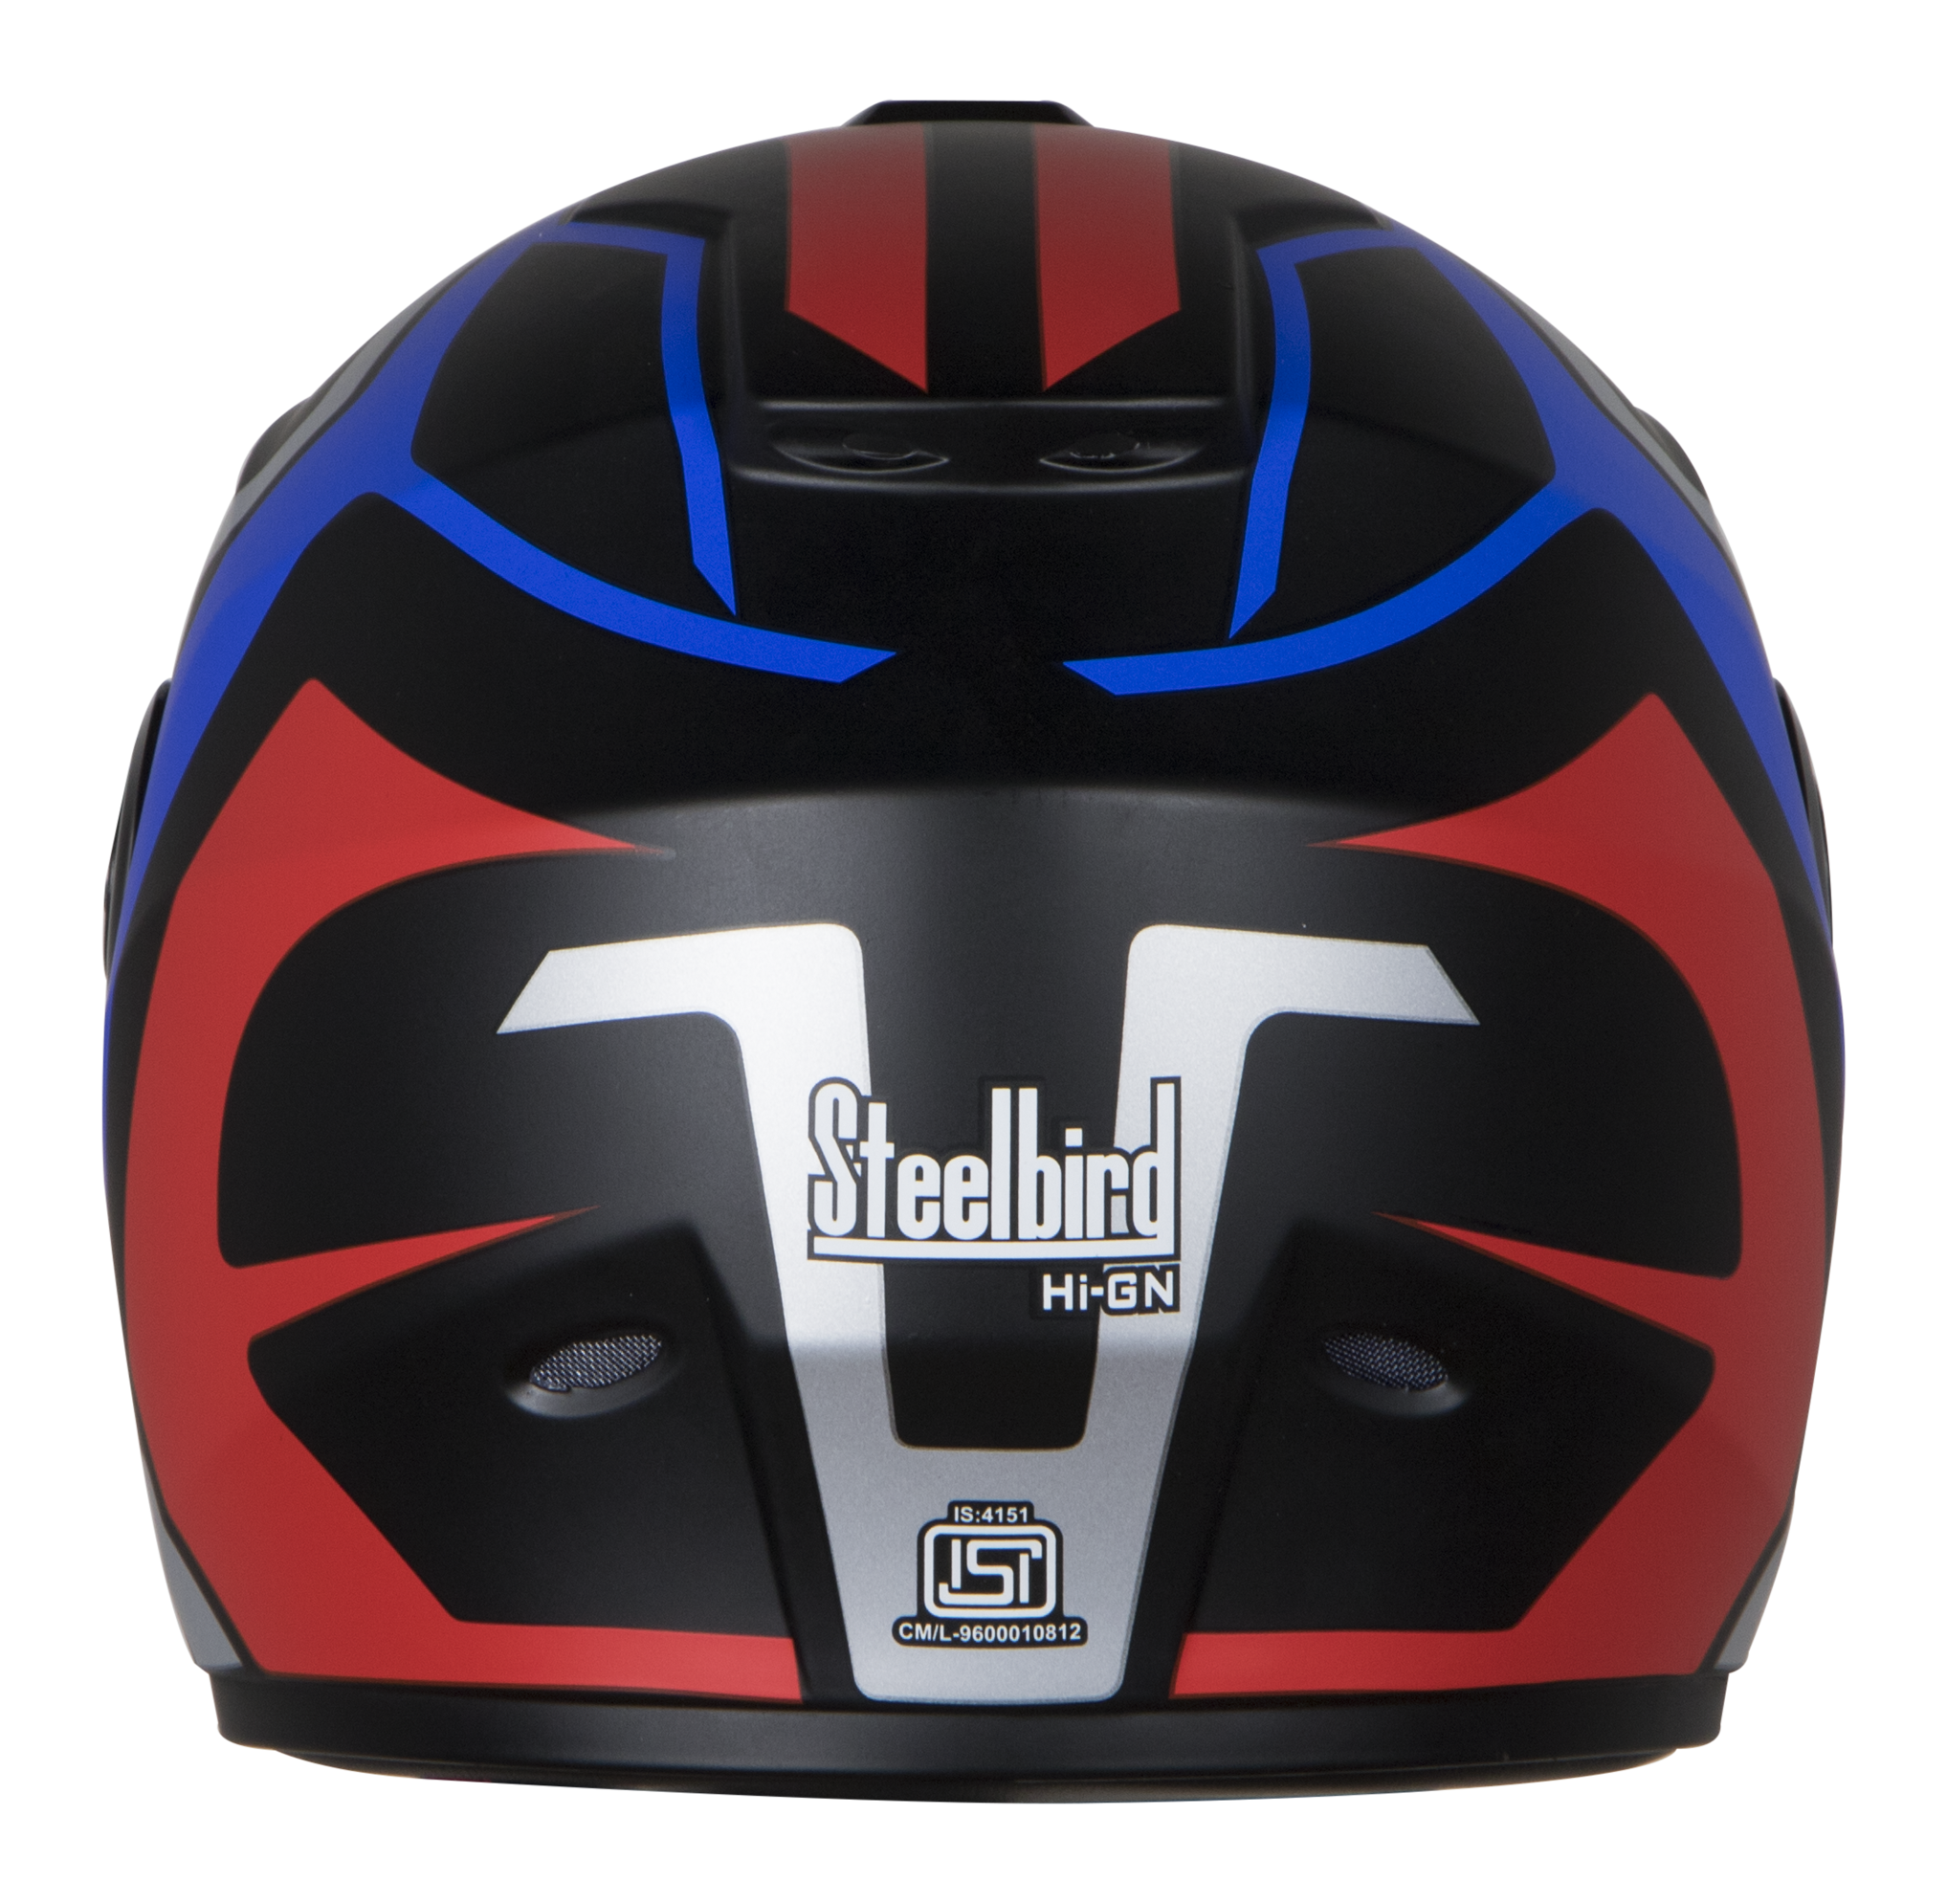 SBH-11 Alpha Beta Glossy Blue Red ( Fitted With Clear Visor Extra Smoke Visor Free)